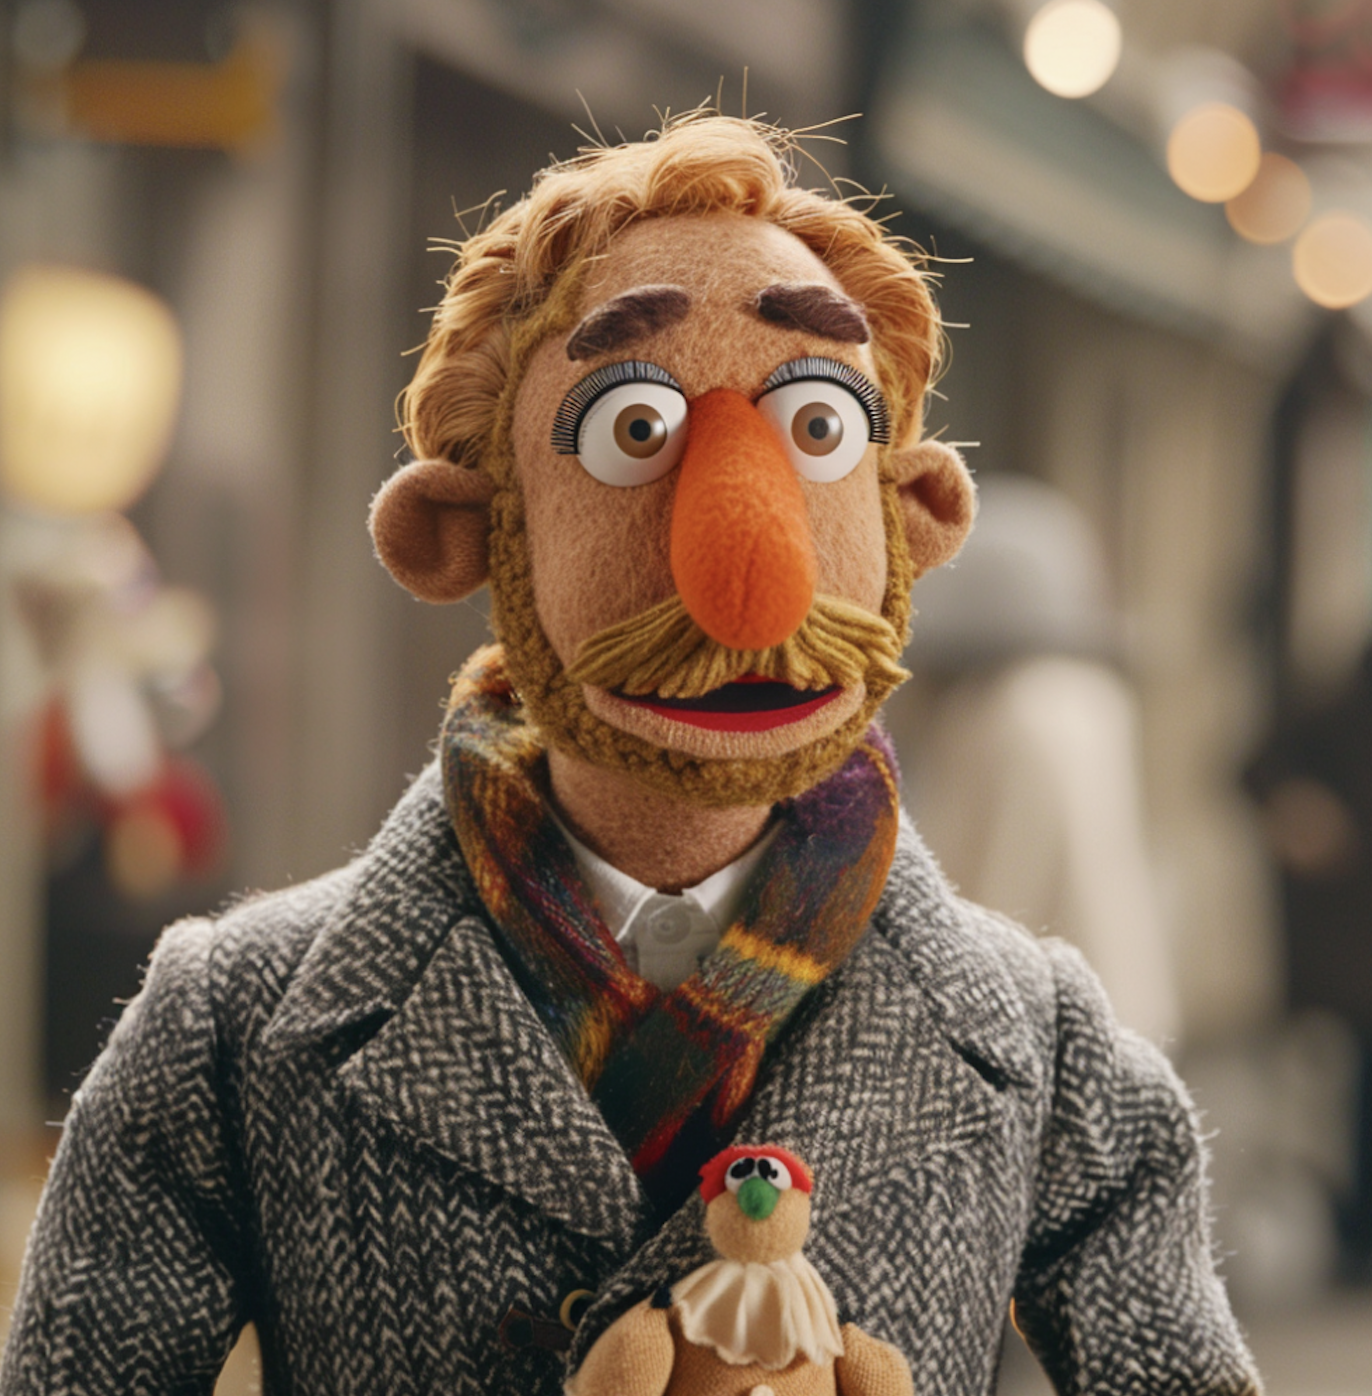 Muppet character Gosling with orangey hair in a gray jacket and holding a doll